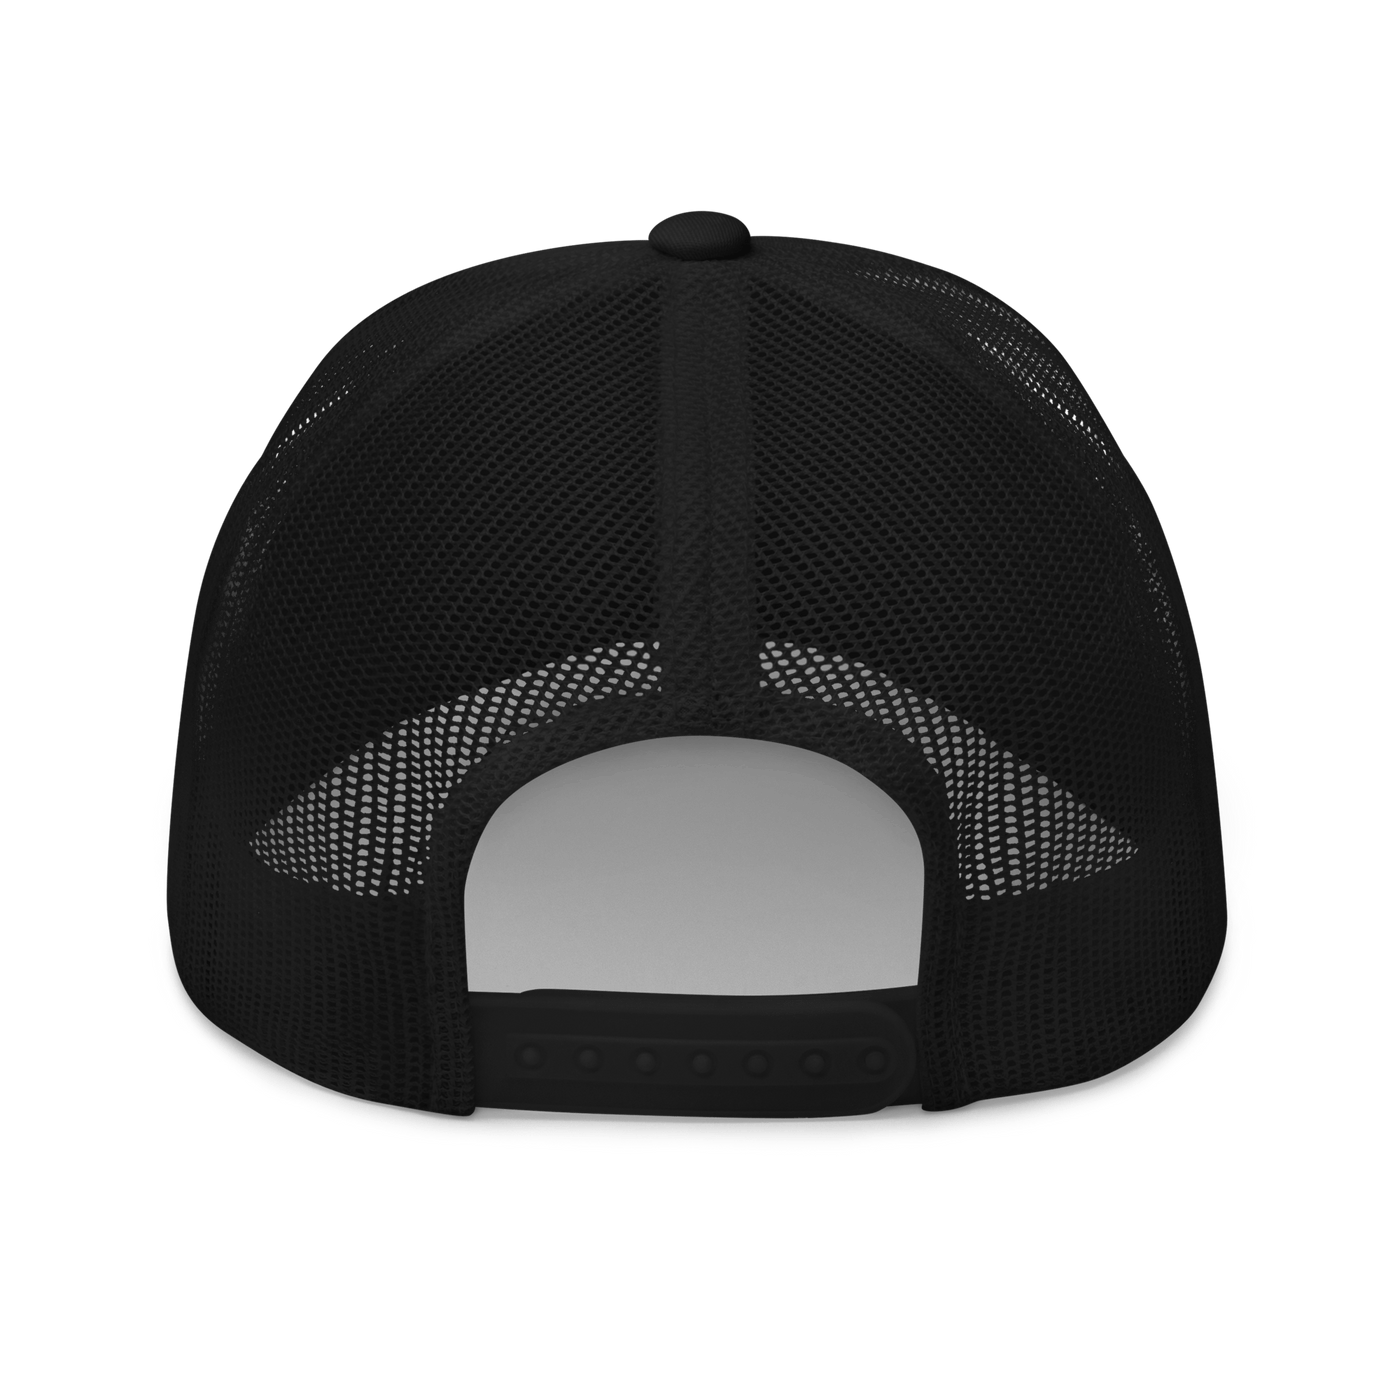 Customize your own Trucker Cap - Black - - Just Another Cap Store